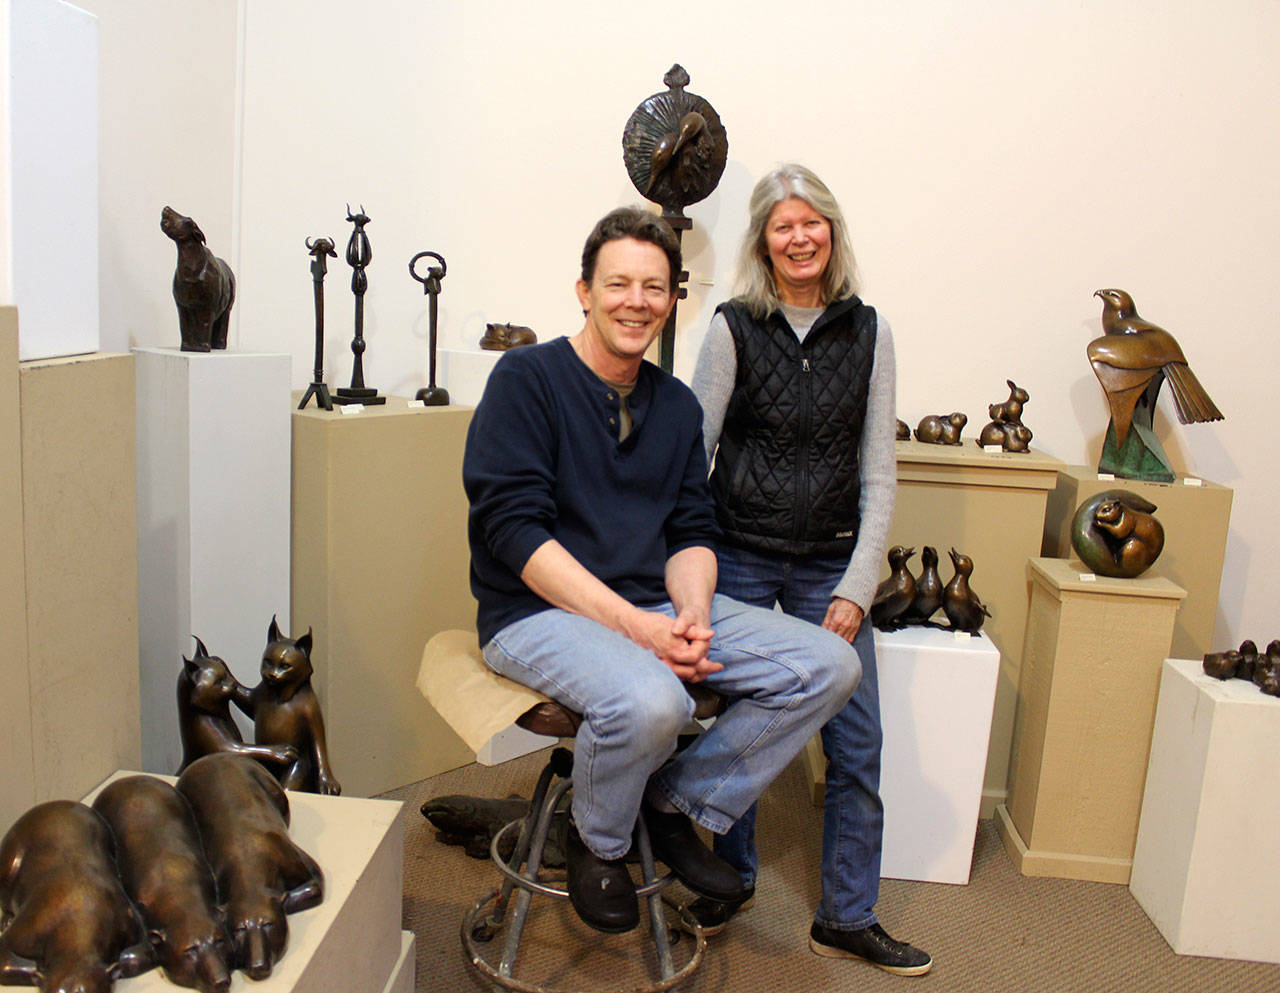 Randy Hudson and Georgia Gerber in their Clinton studio gallery. (Photo by Patricia Guthrie/Whidbey News Group)